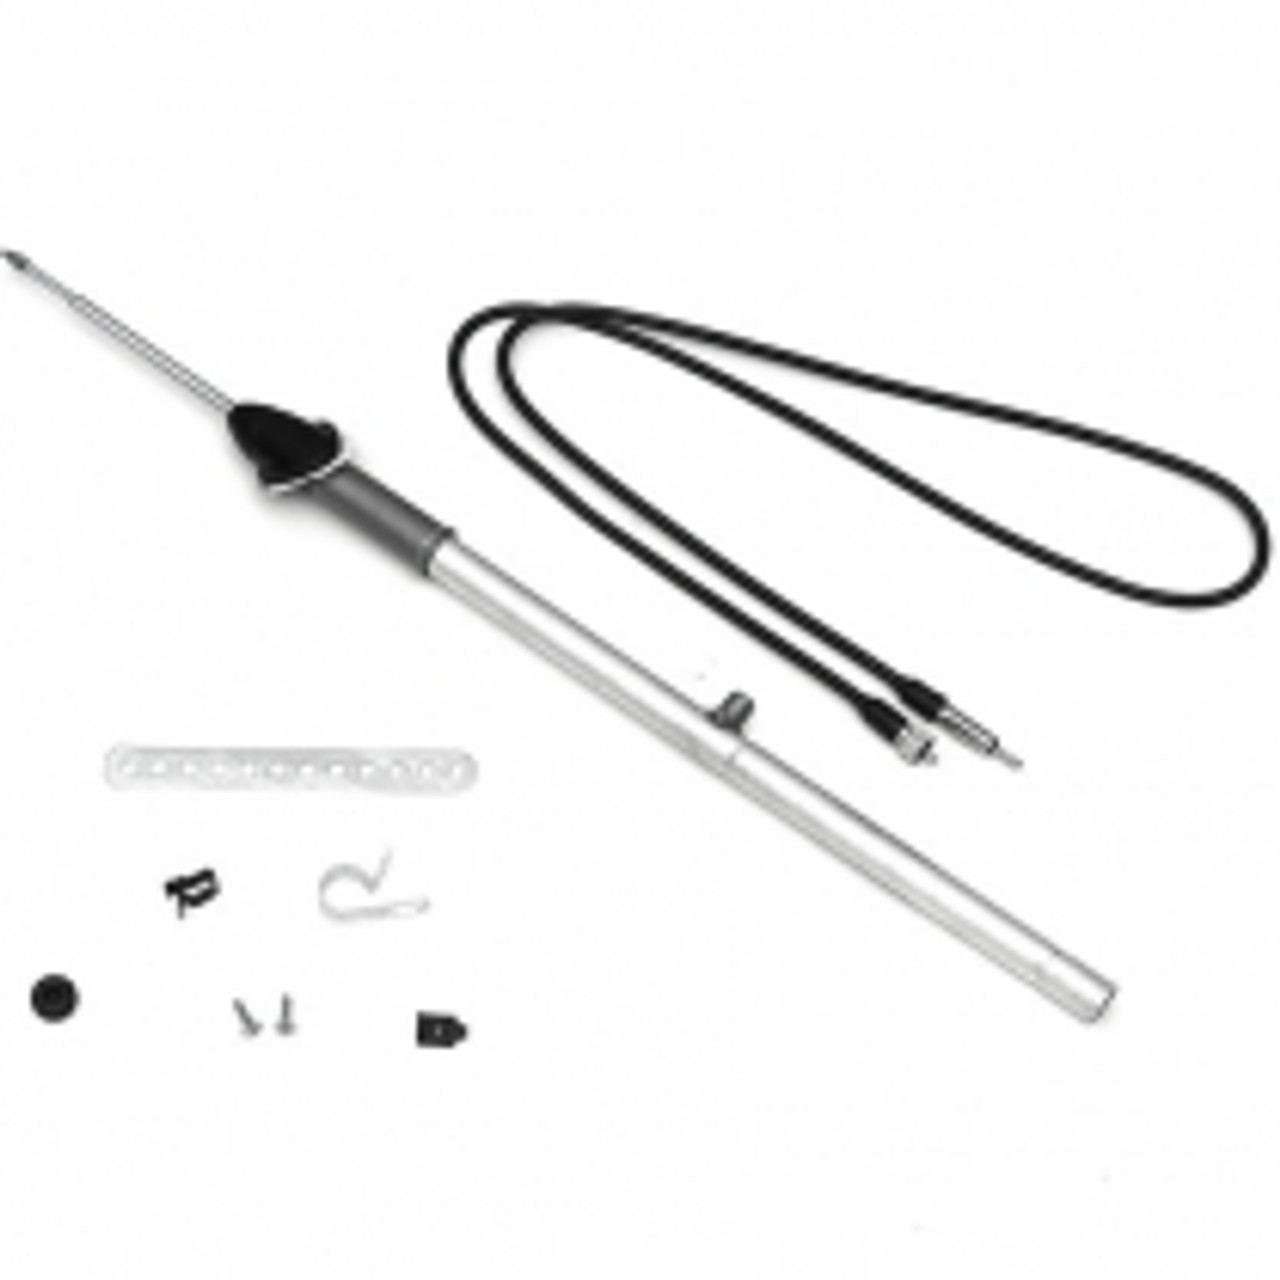 1955-1959 Chevy/GMC Truck Radio Antenna Kit Telescopic, Includes Cable